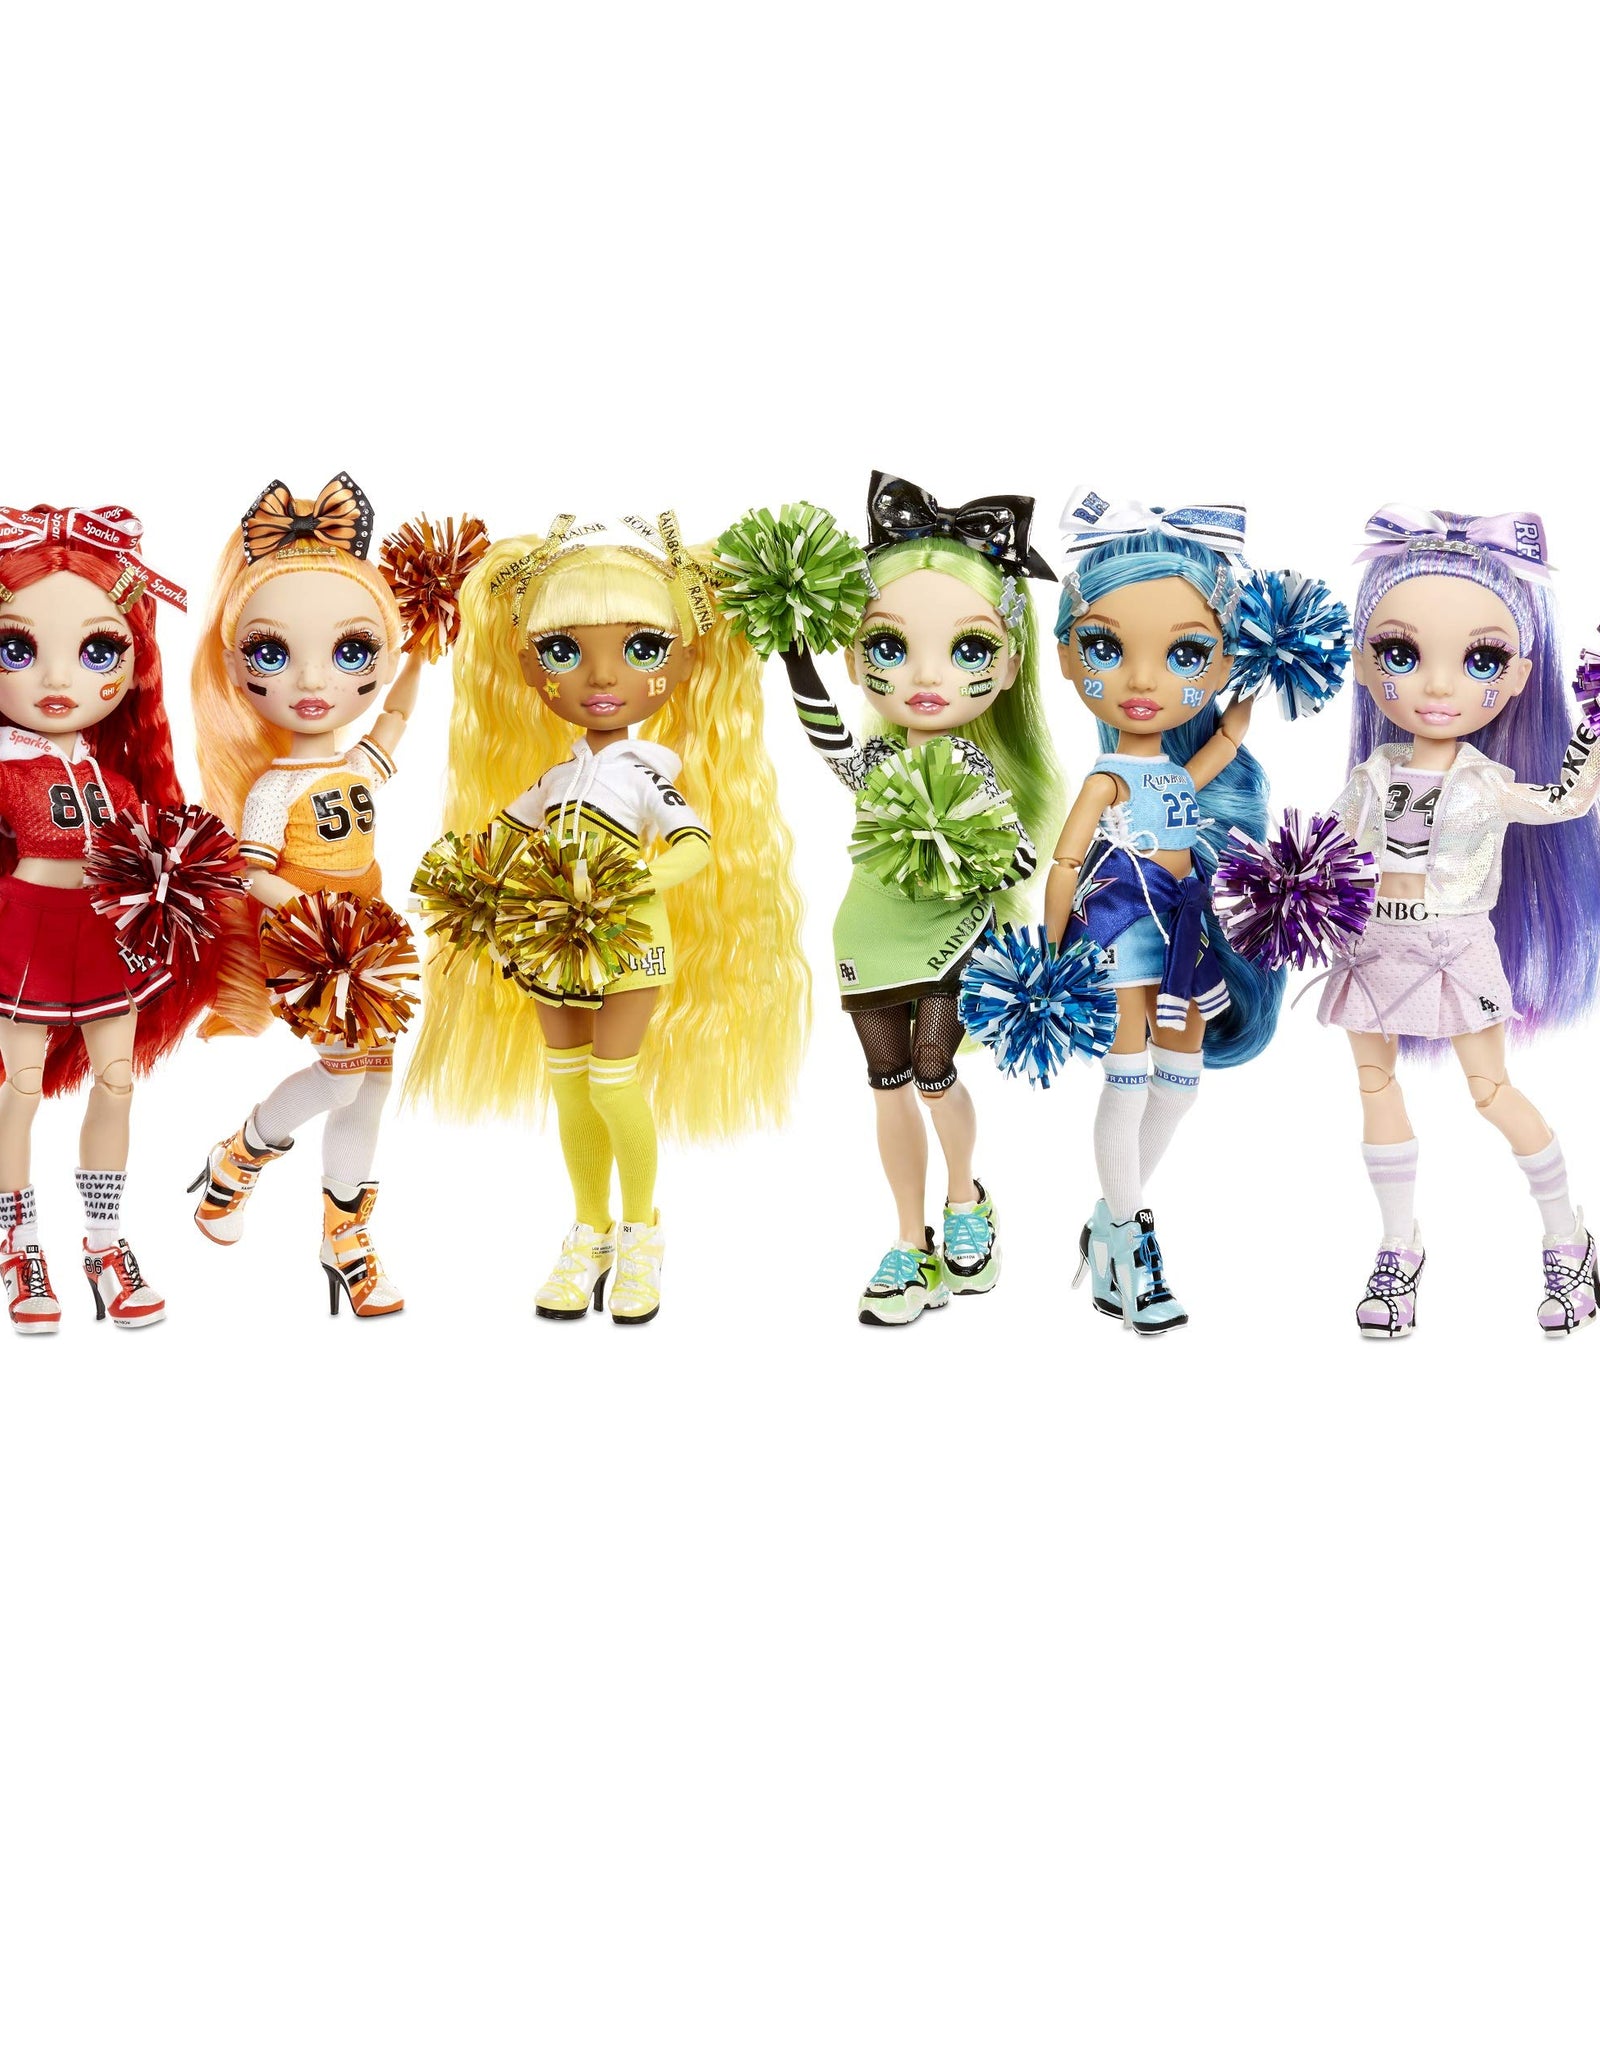 Rainbow High Cheer Jade Hunter – Green Cheerleader Fashion Doll with 2 Pom Poms and Doll Accessories, Great Gift for Kids 6-12 Years Old